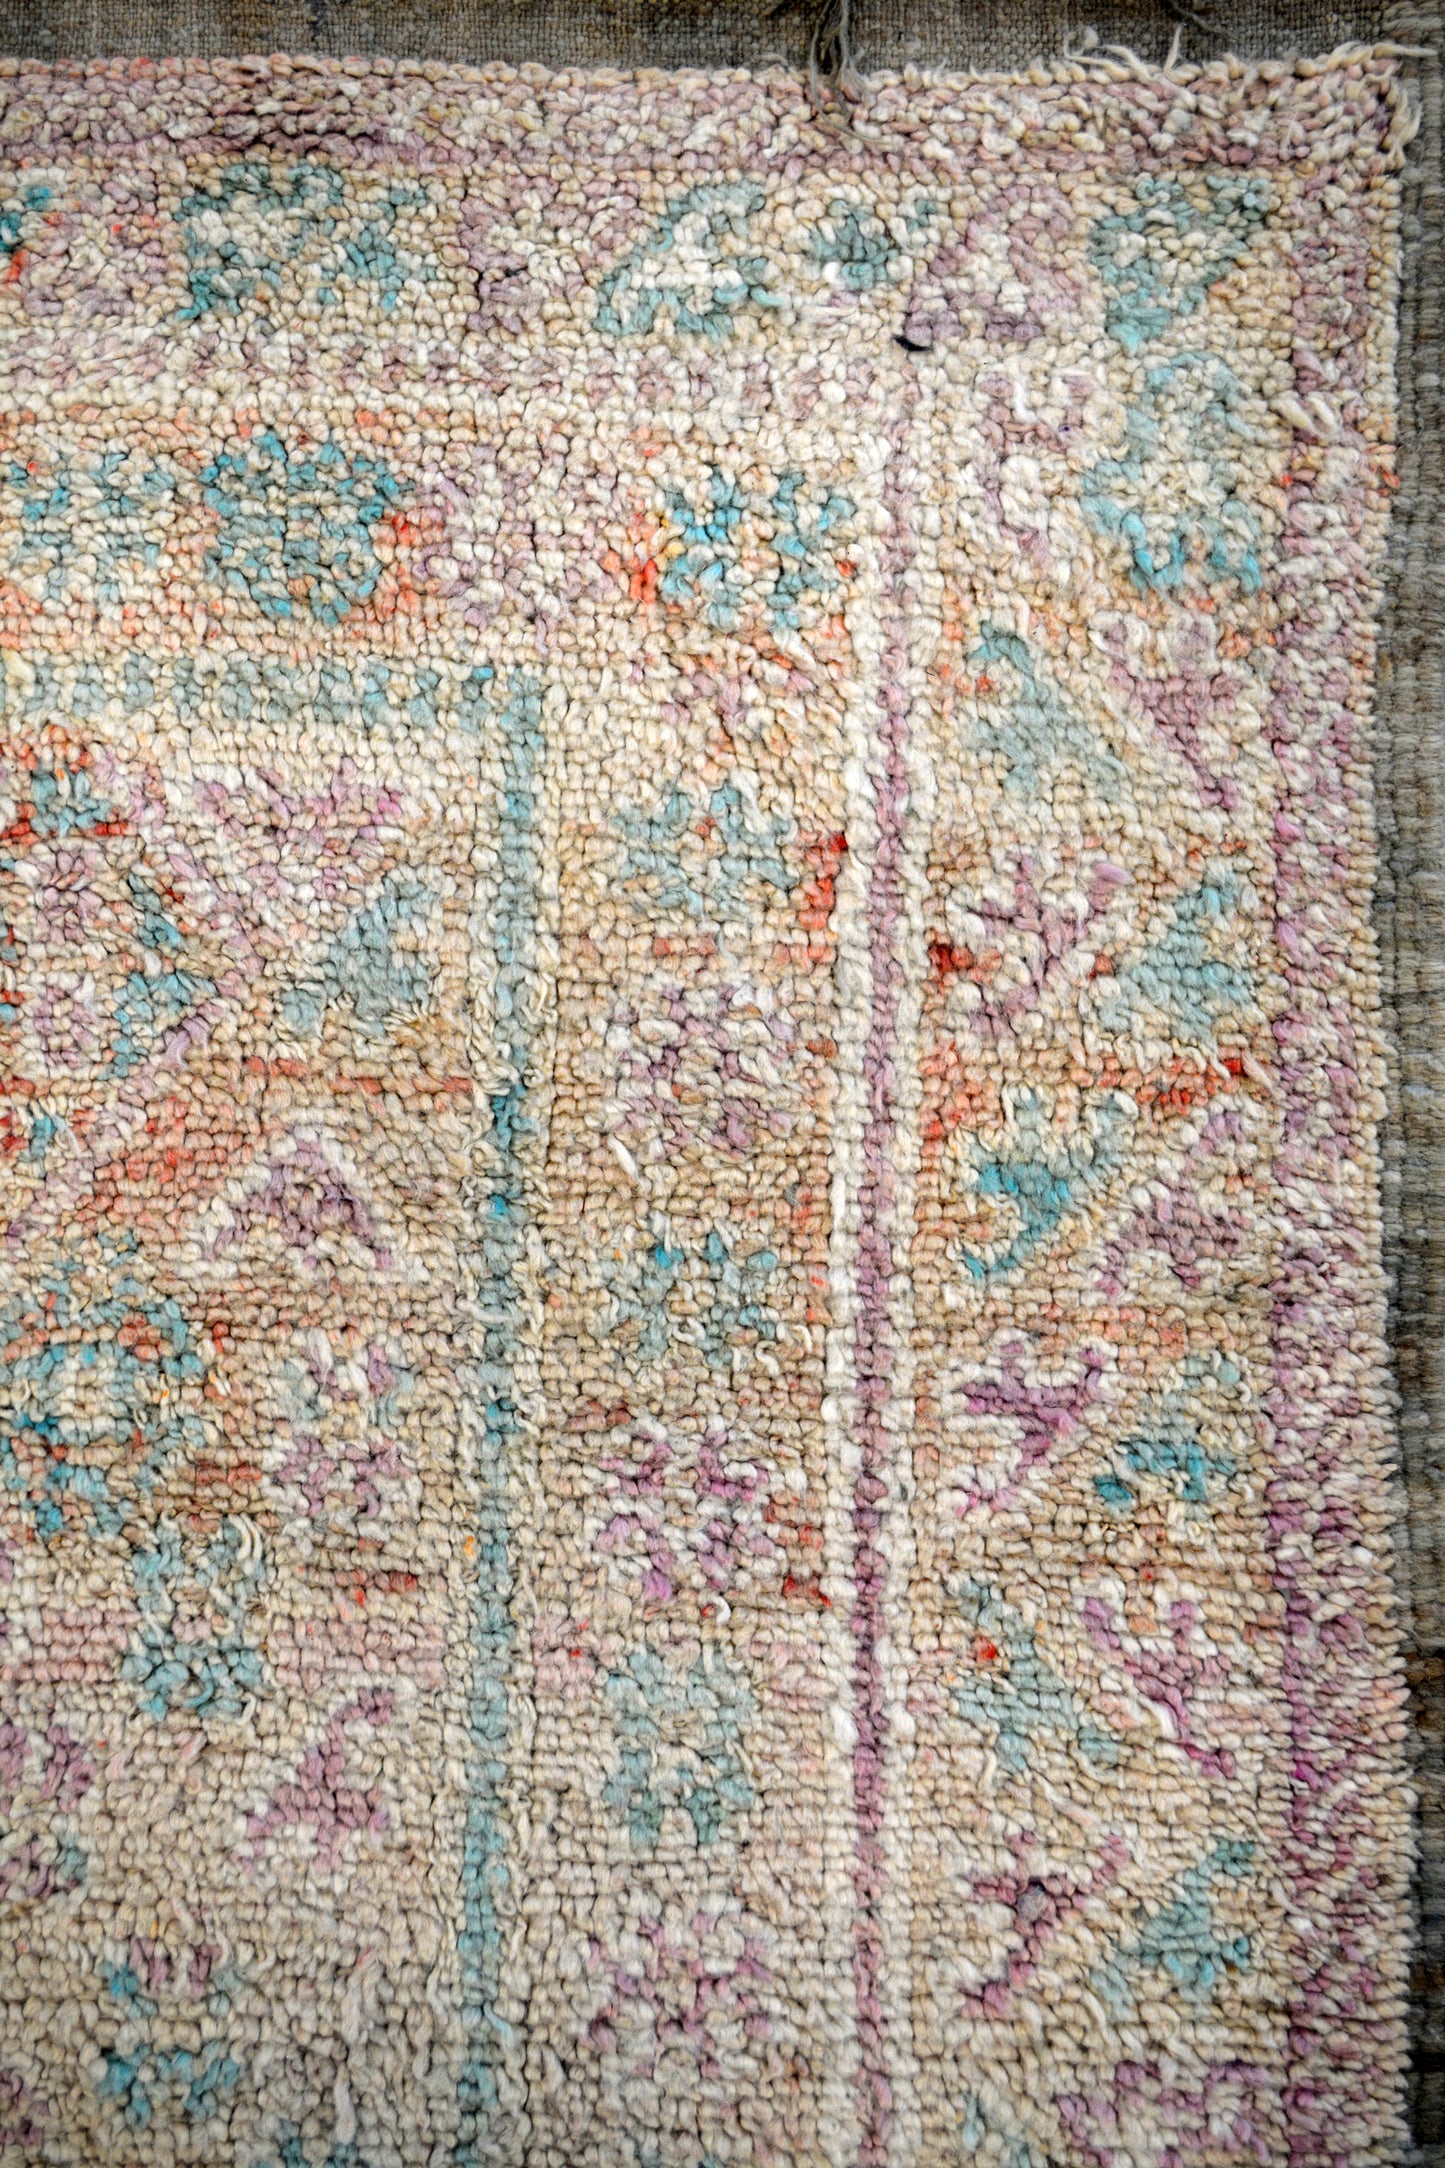 The top right corner shows how the rugs has fringes all around.